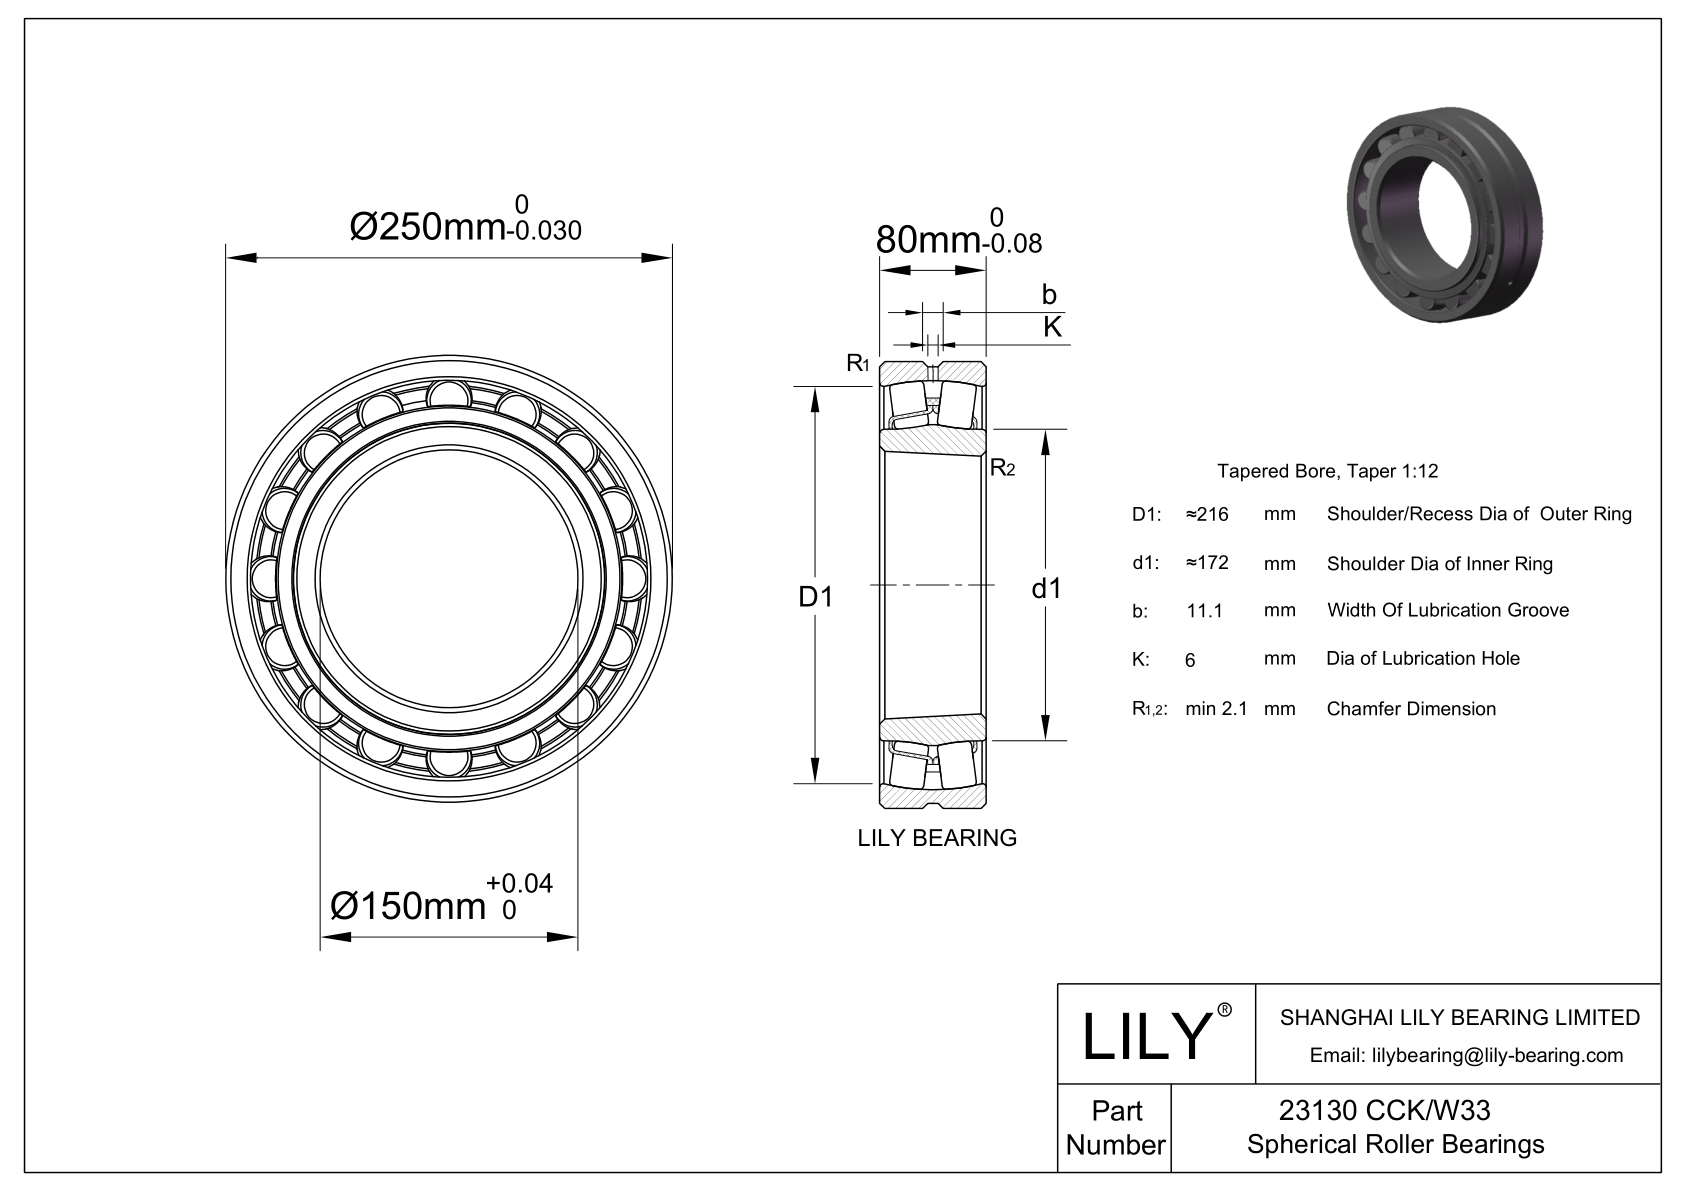 23130 CCK/W33 Double Row Spherical Roller Bearing cad drawing